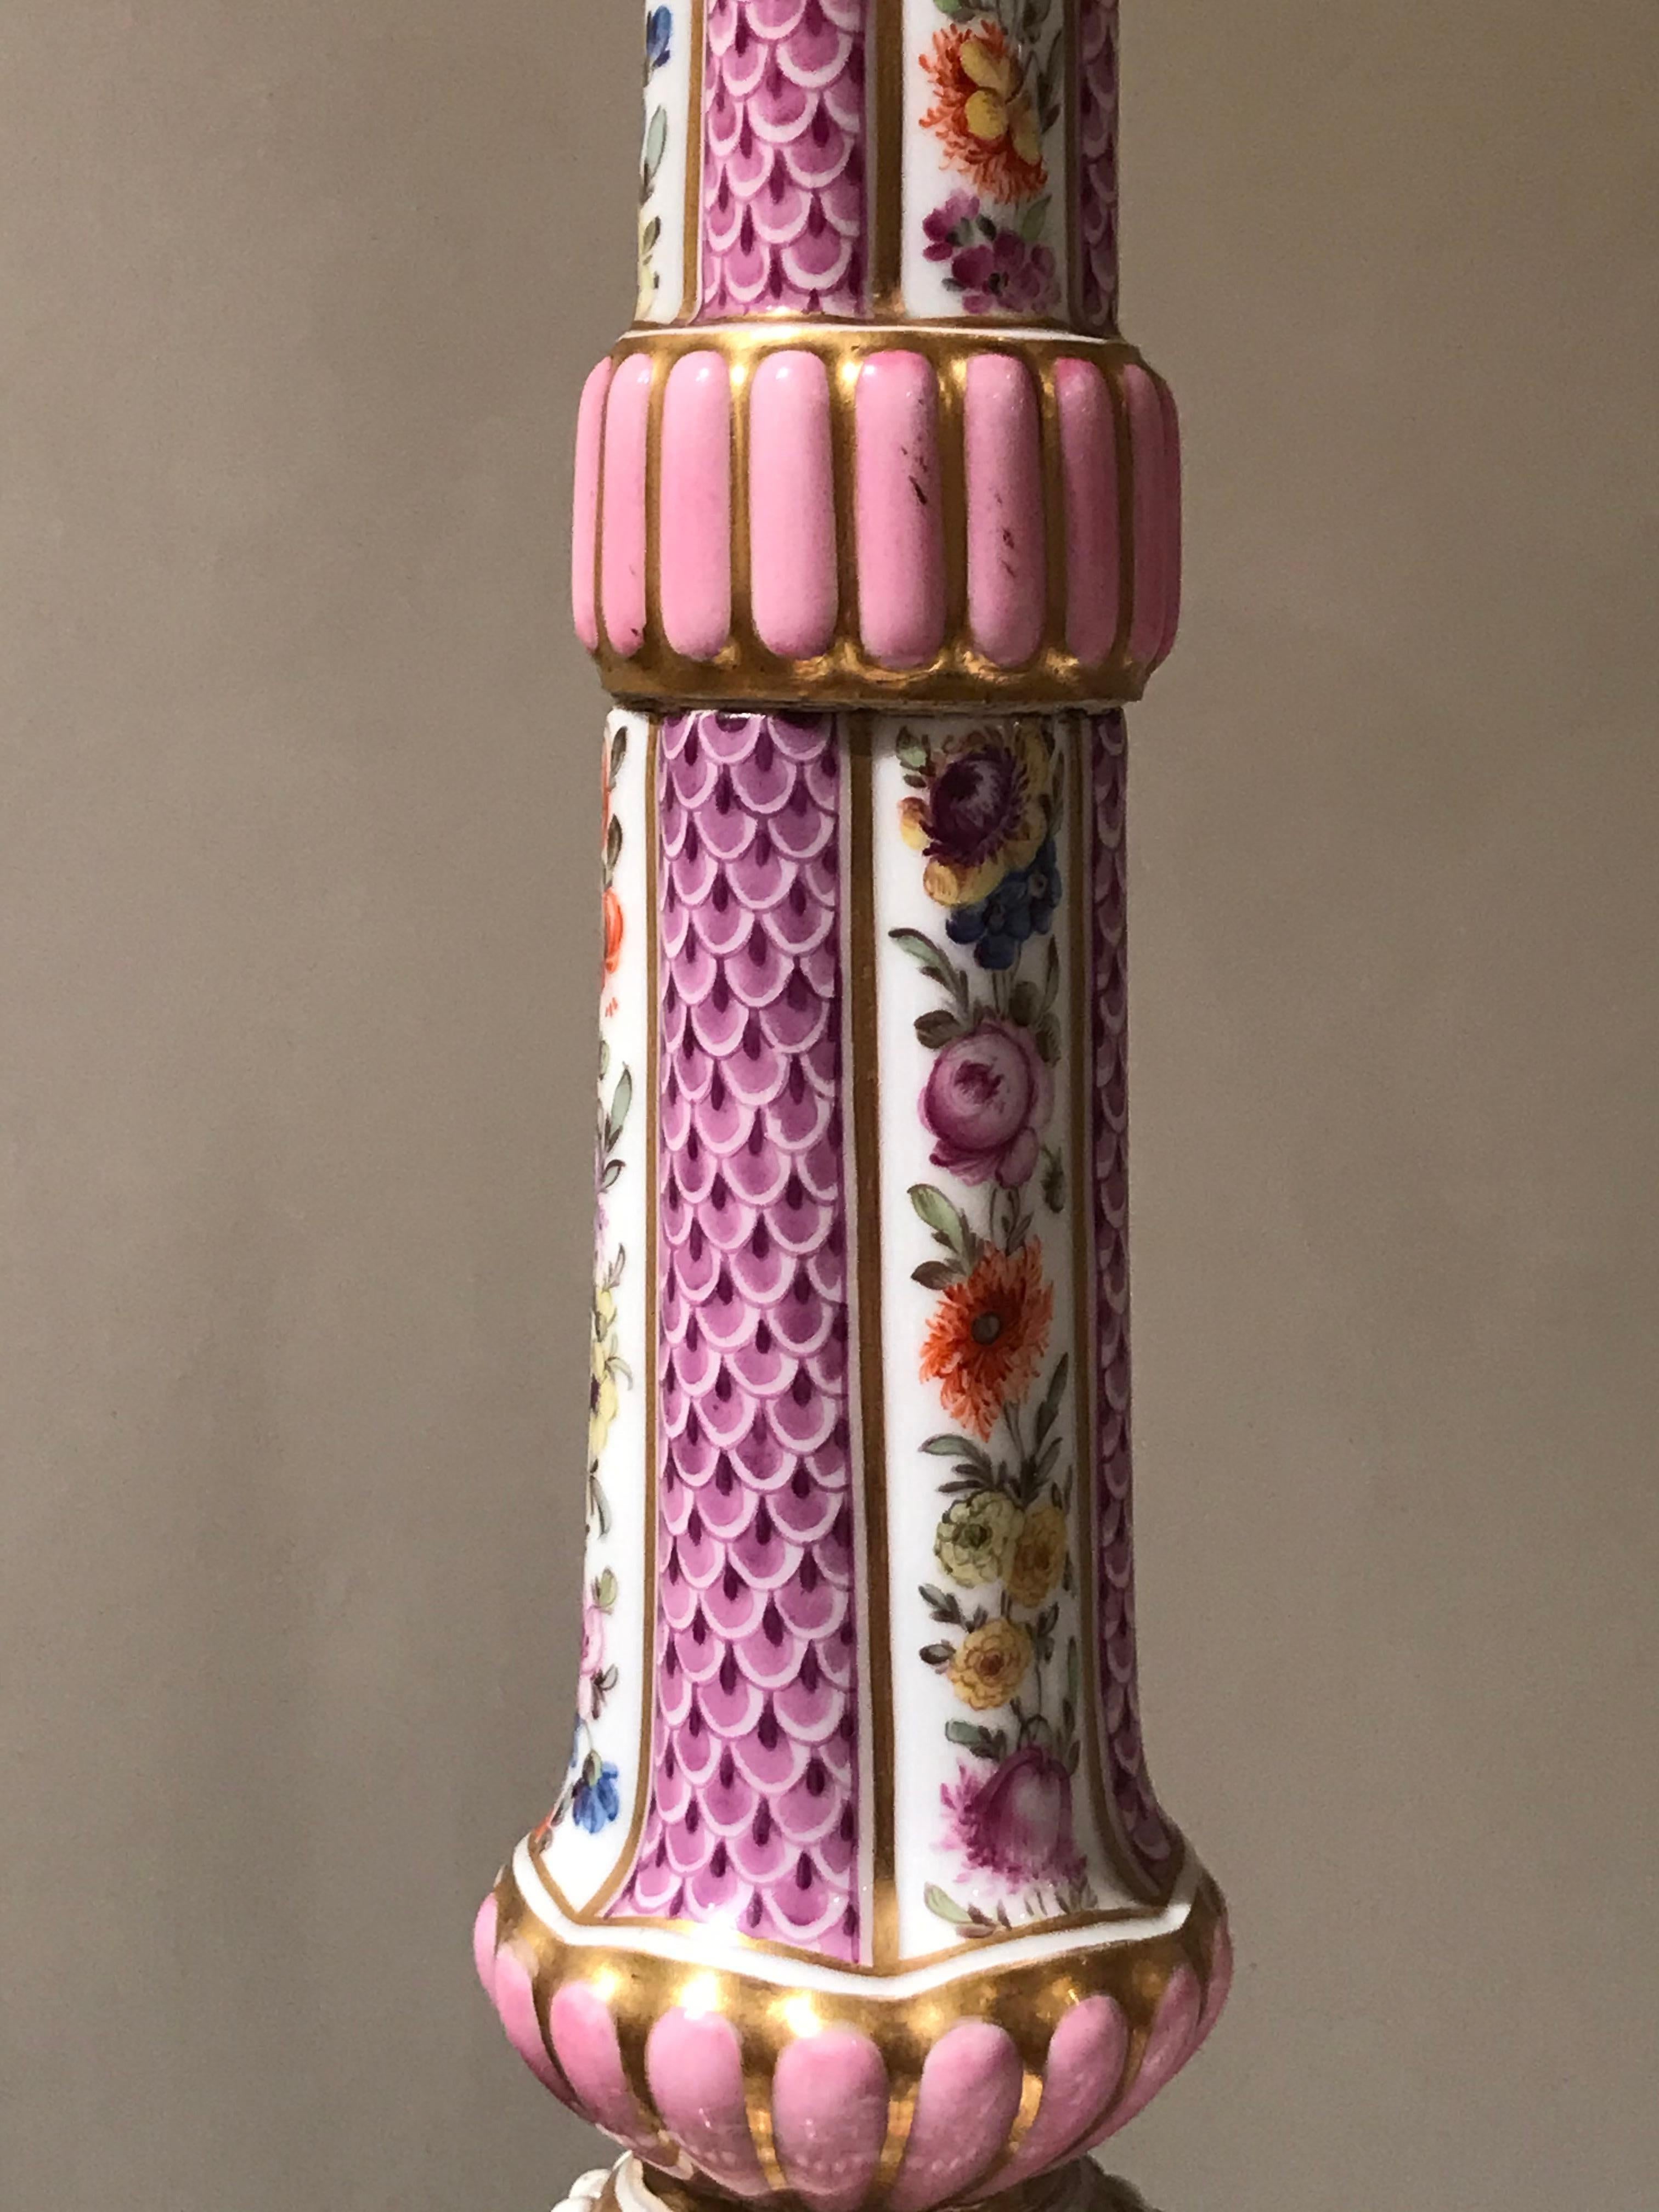 Girandoles / Table Candlesticks in Porcelain from Meissen, Germany, 1790 - 1810 For Sale 2